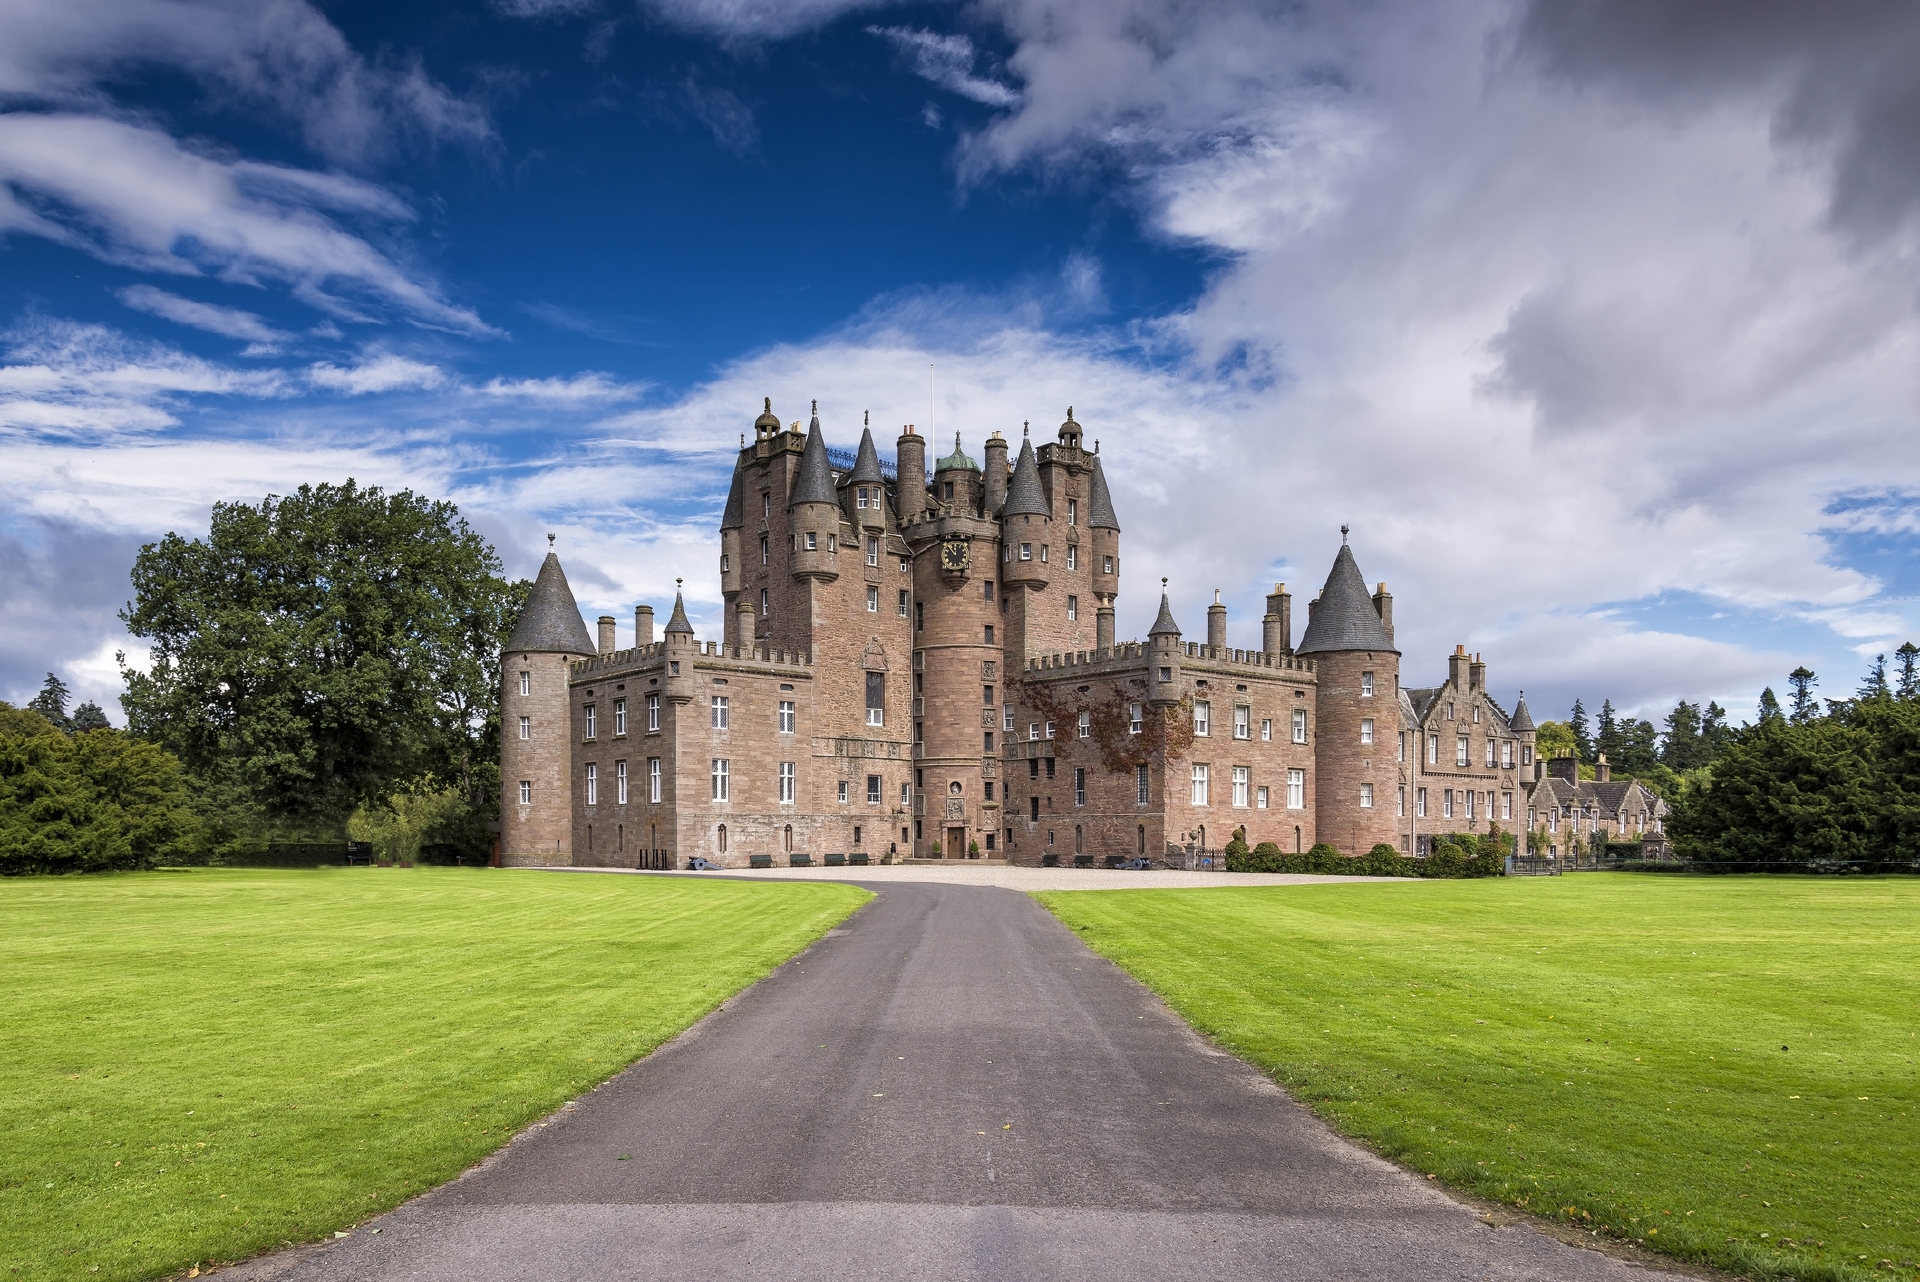 Visitor numbers to see Angus attractions were at record numbers last year.